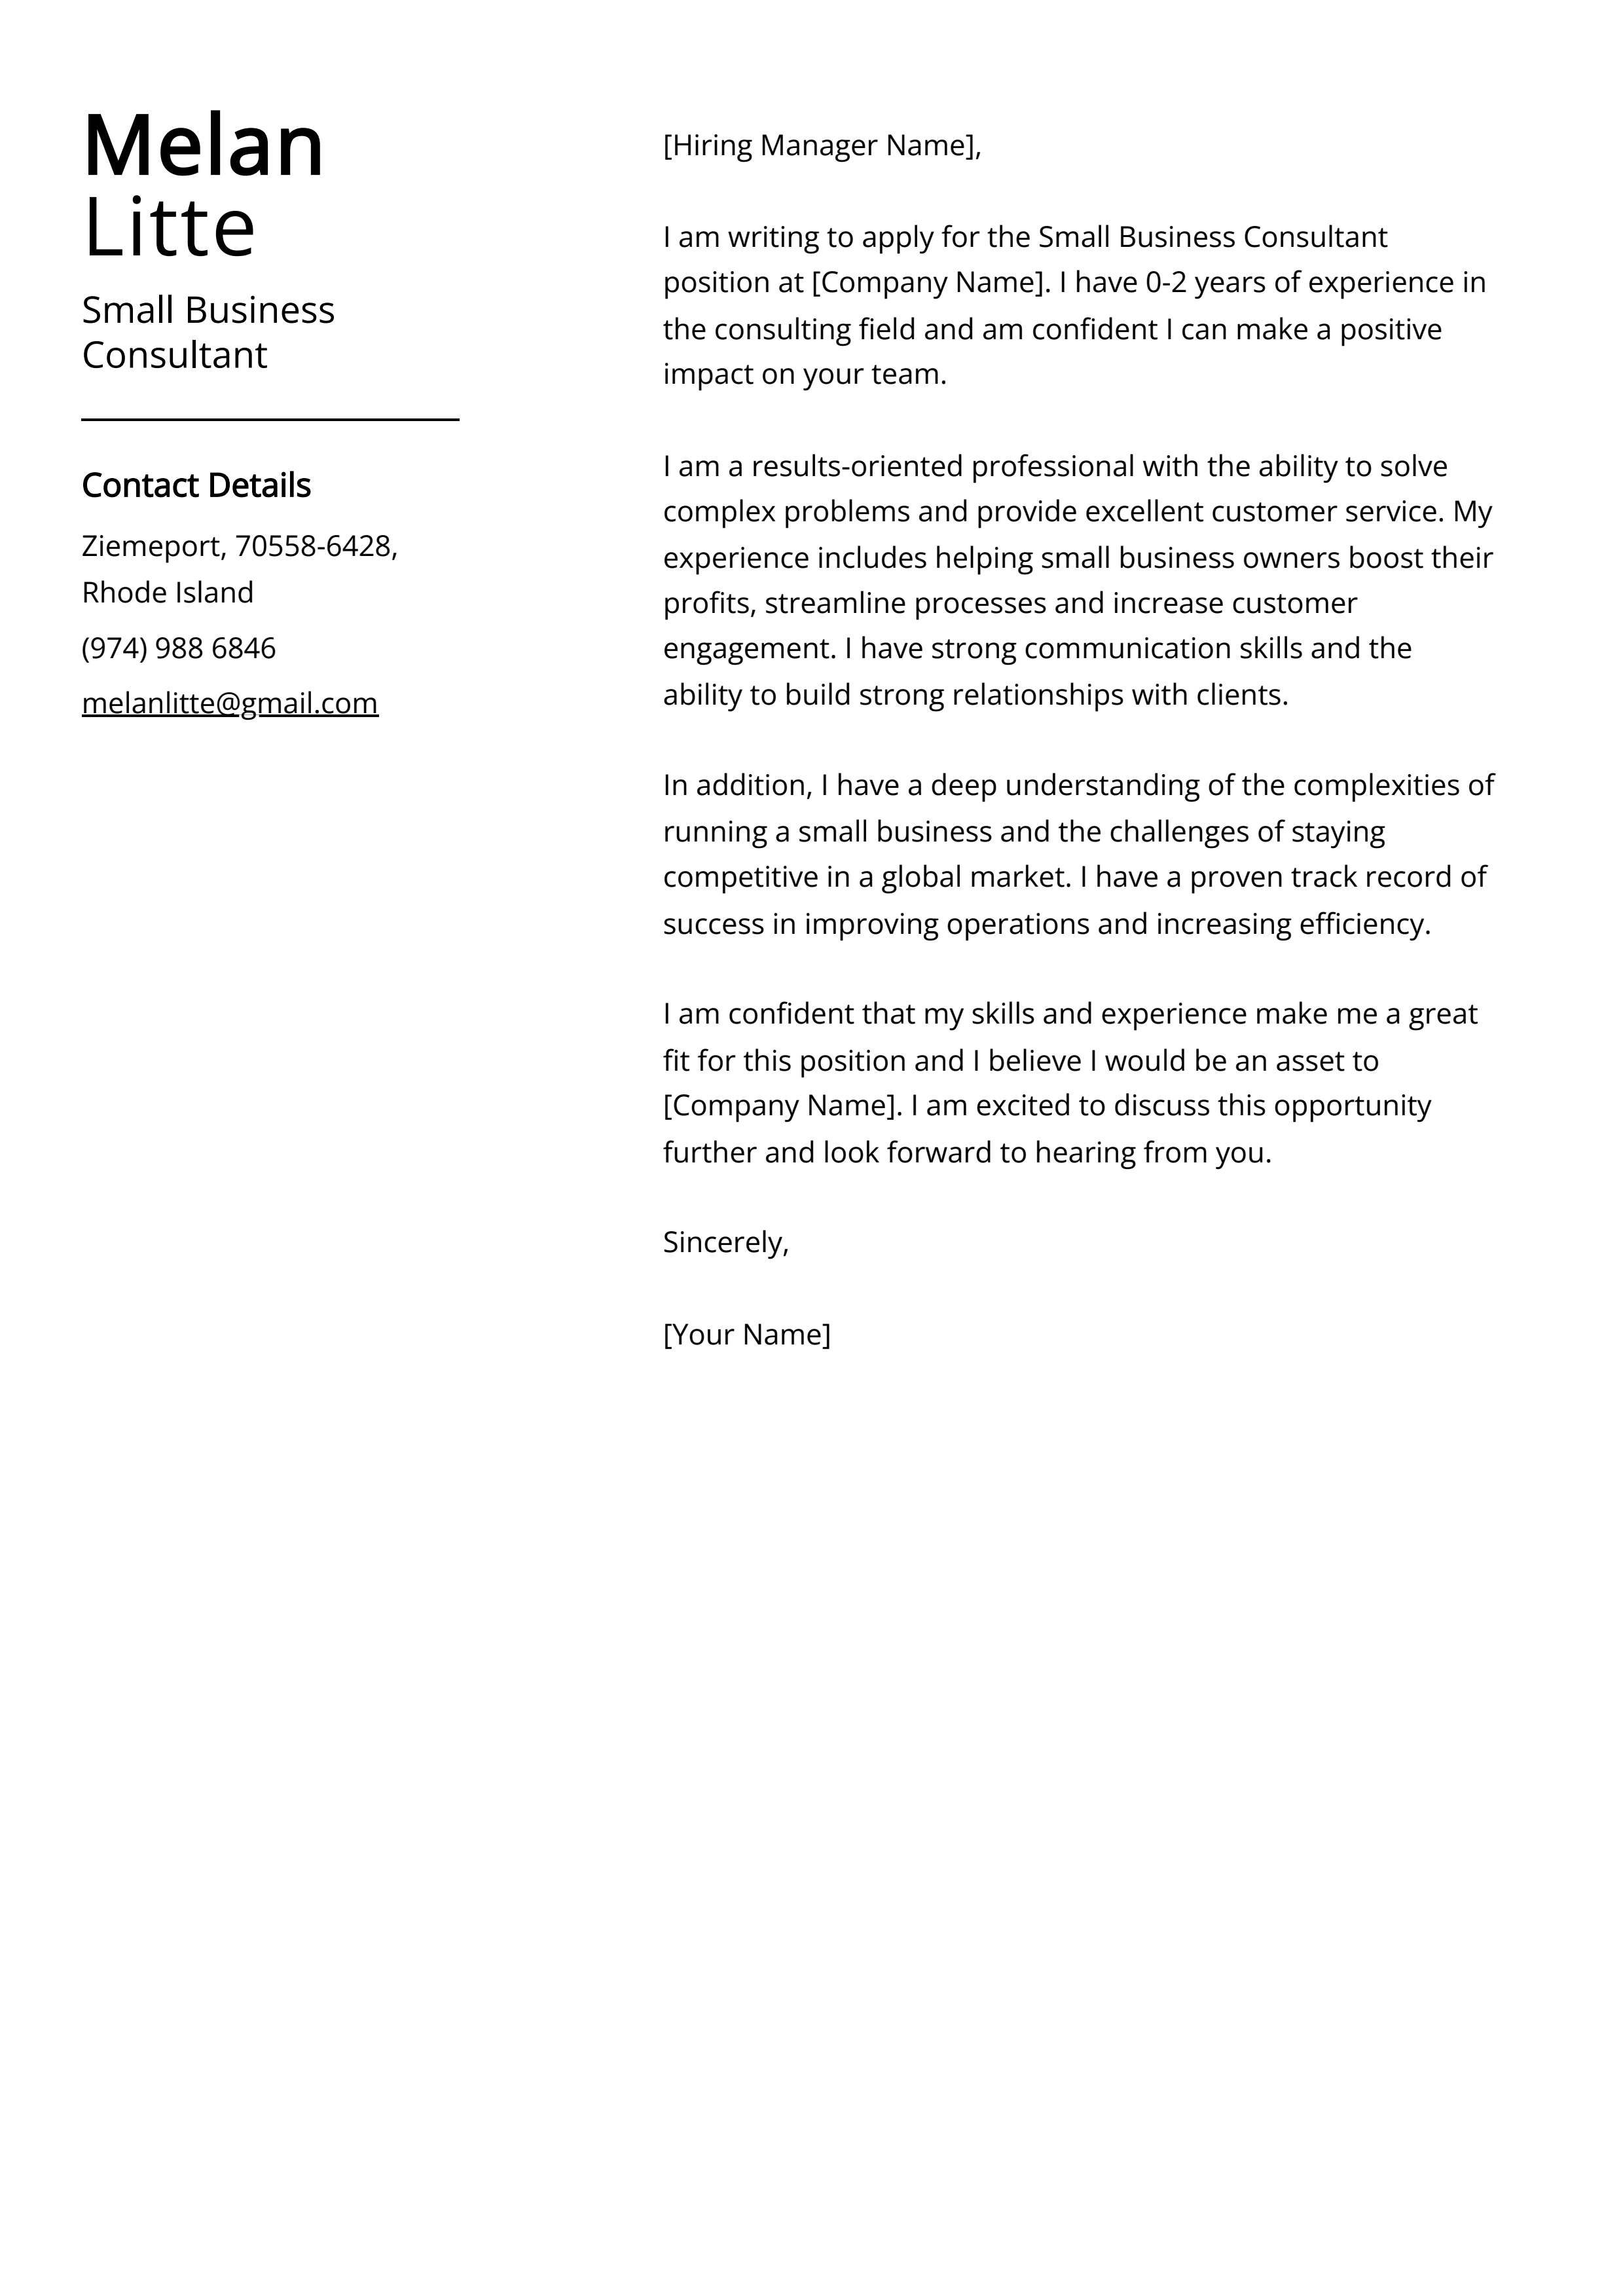 Small Business Consultant Cover Letter Example